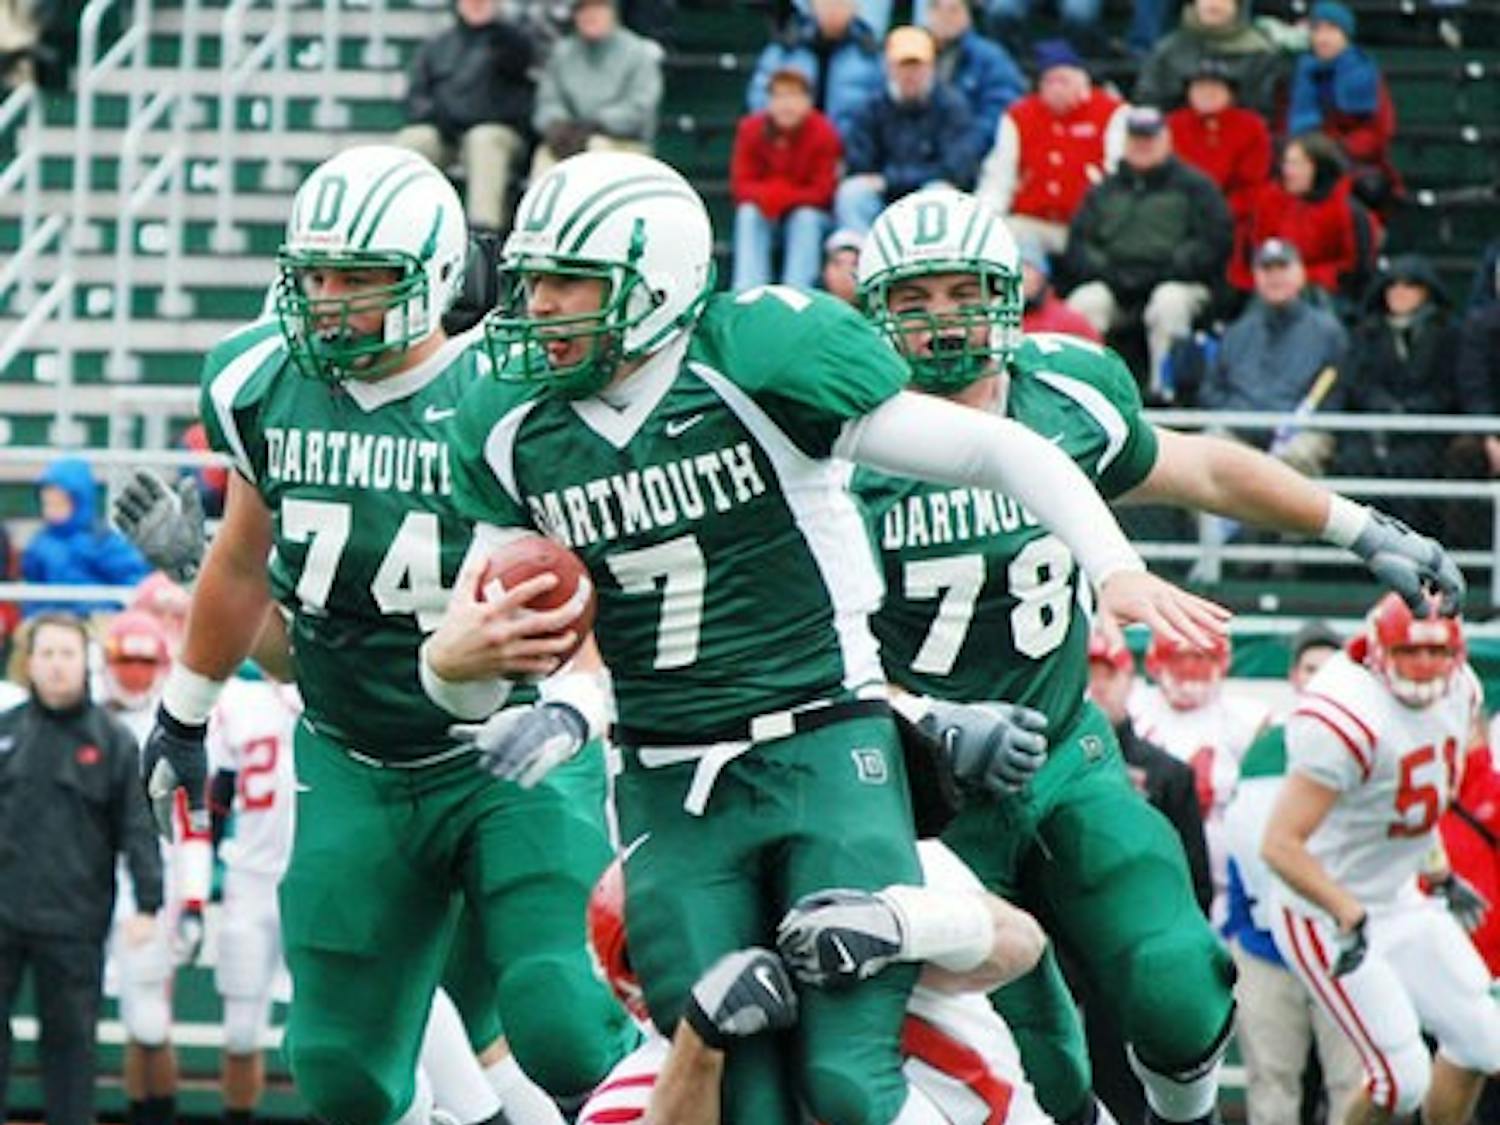 Tom Bennewitz '08 should lead the Big Green to victory over Princeton.